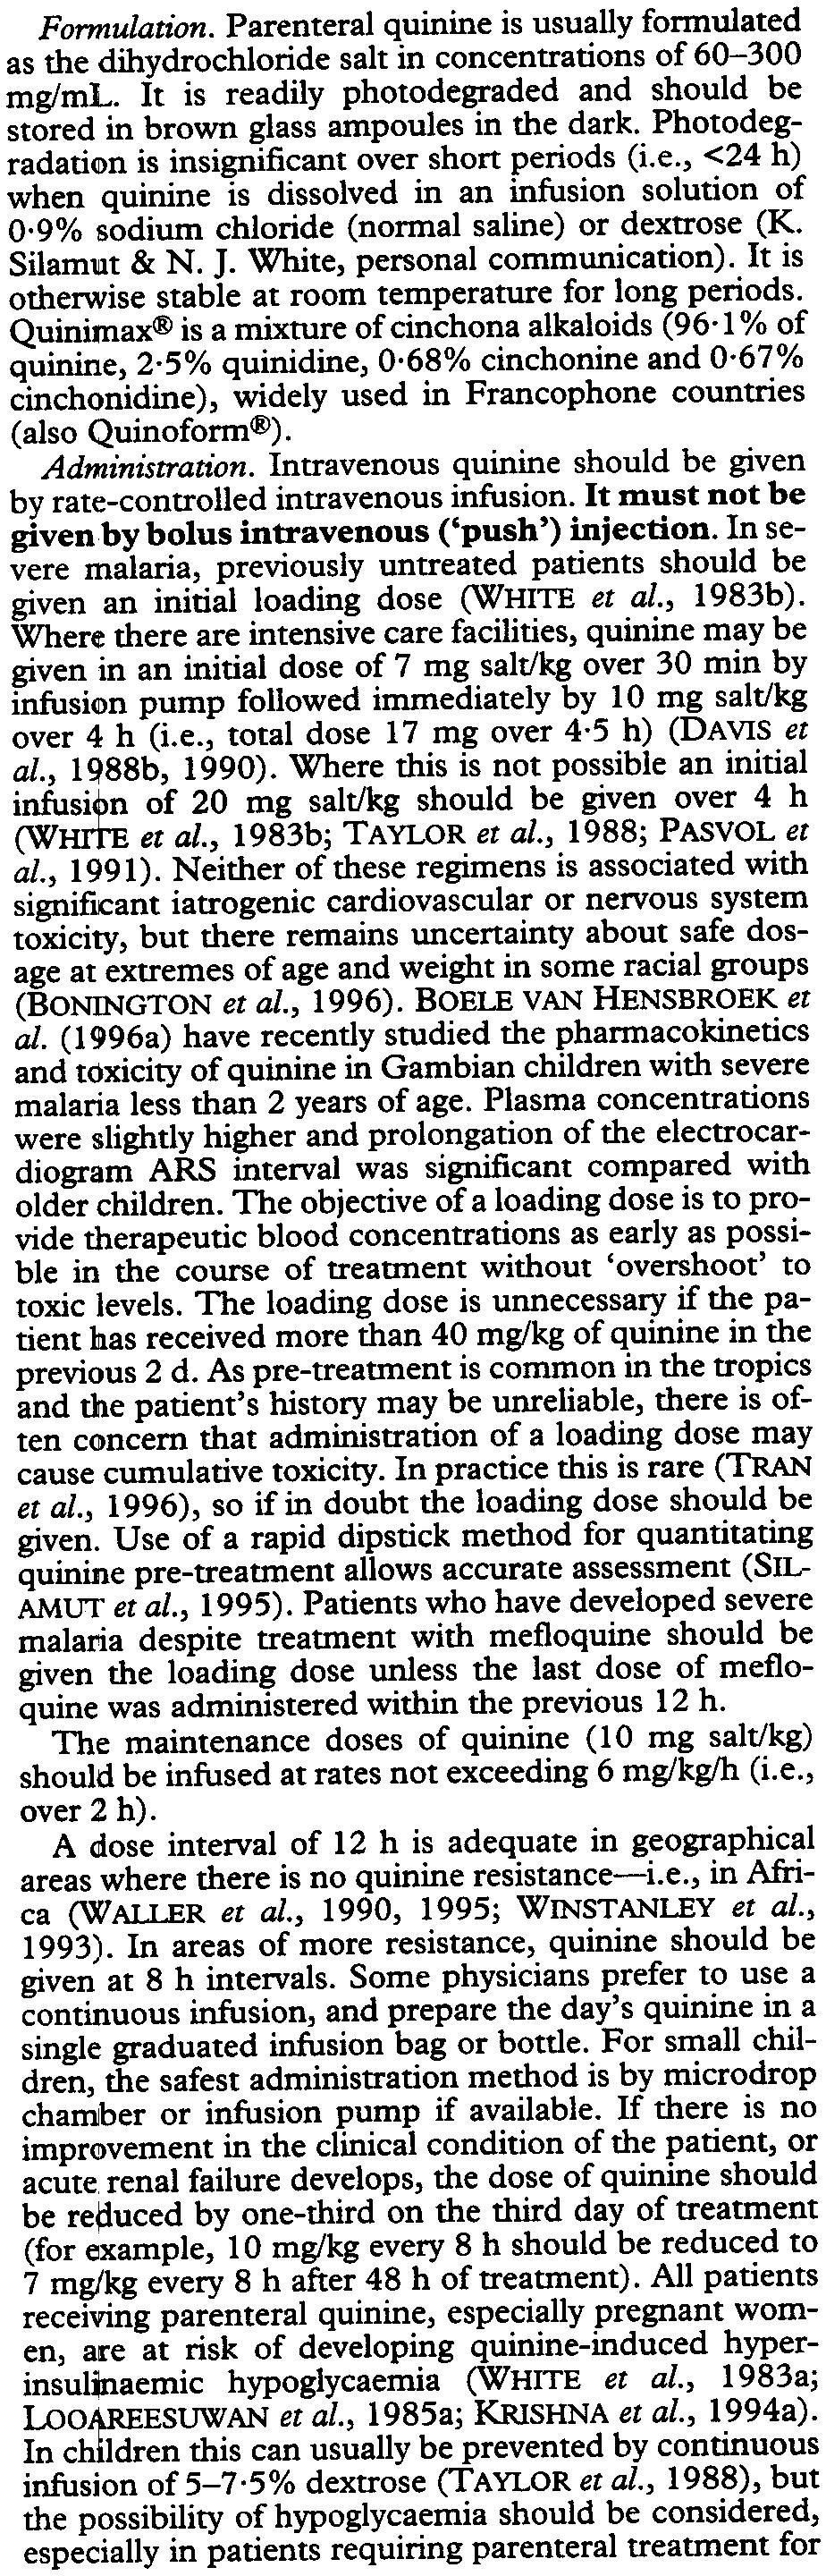 TRANSC110NS OFTHE ROYAL SOCIETY OFTROPICAL MEDICINE AND HYGIENE (2000) 94, SUPPLEMENT Formulation.